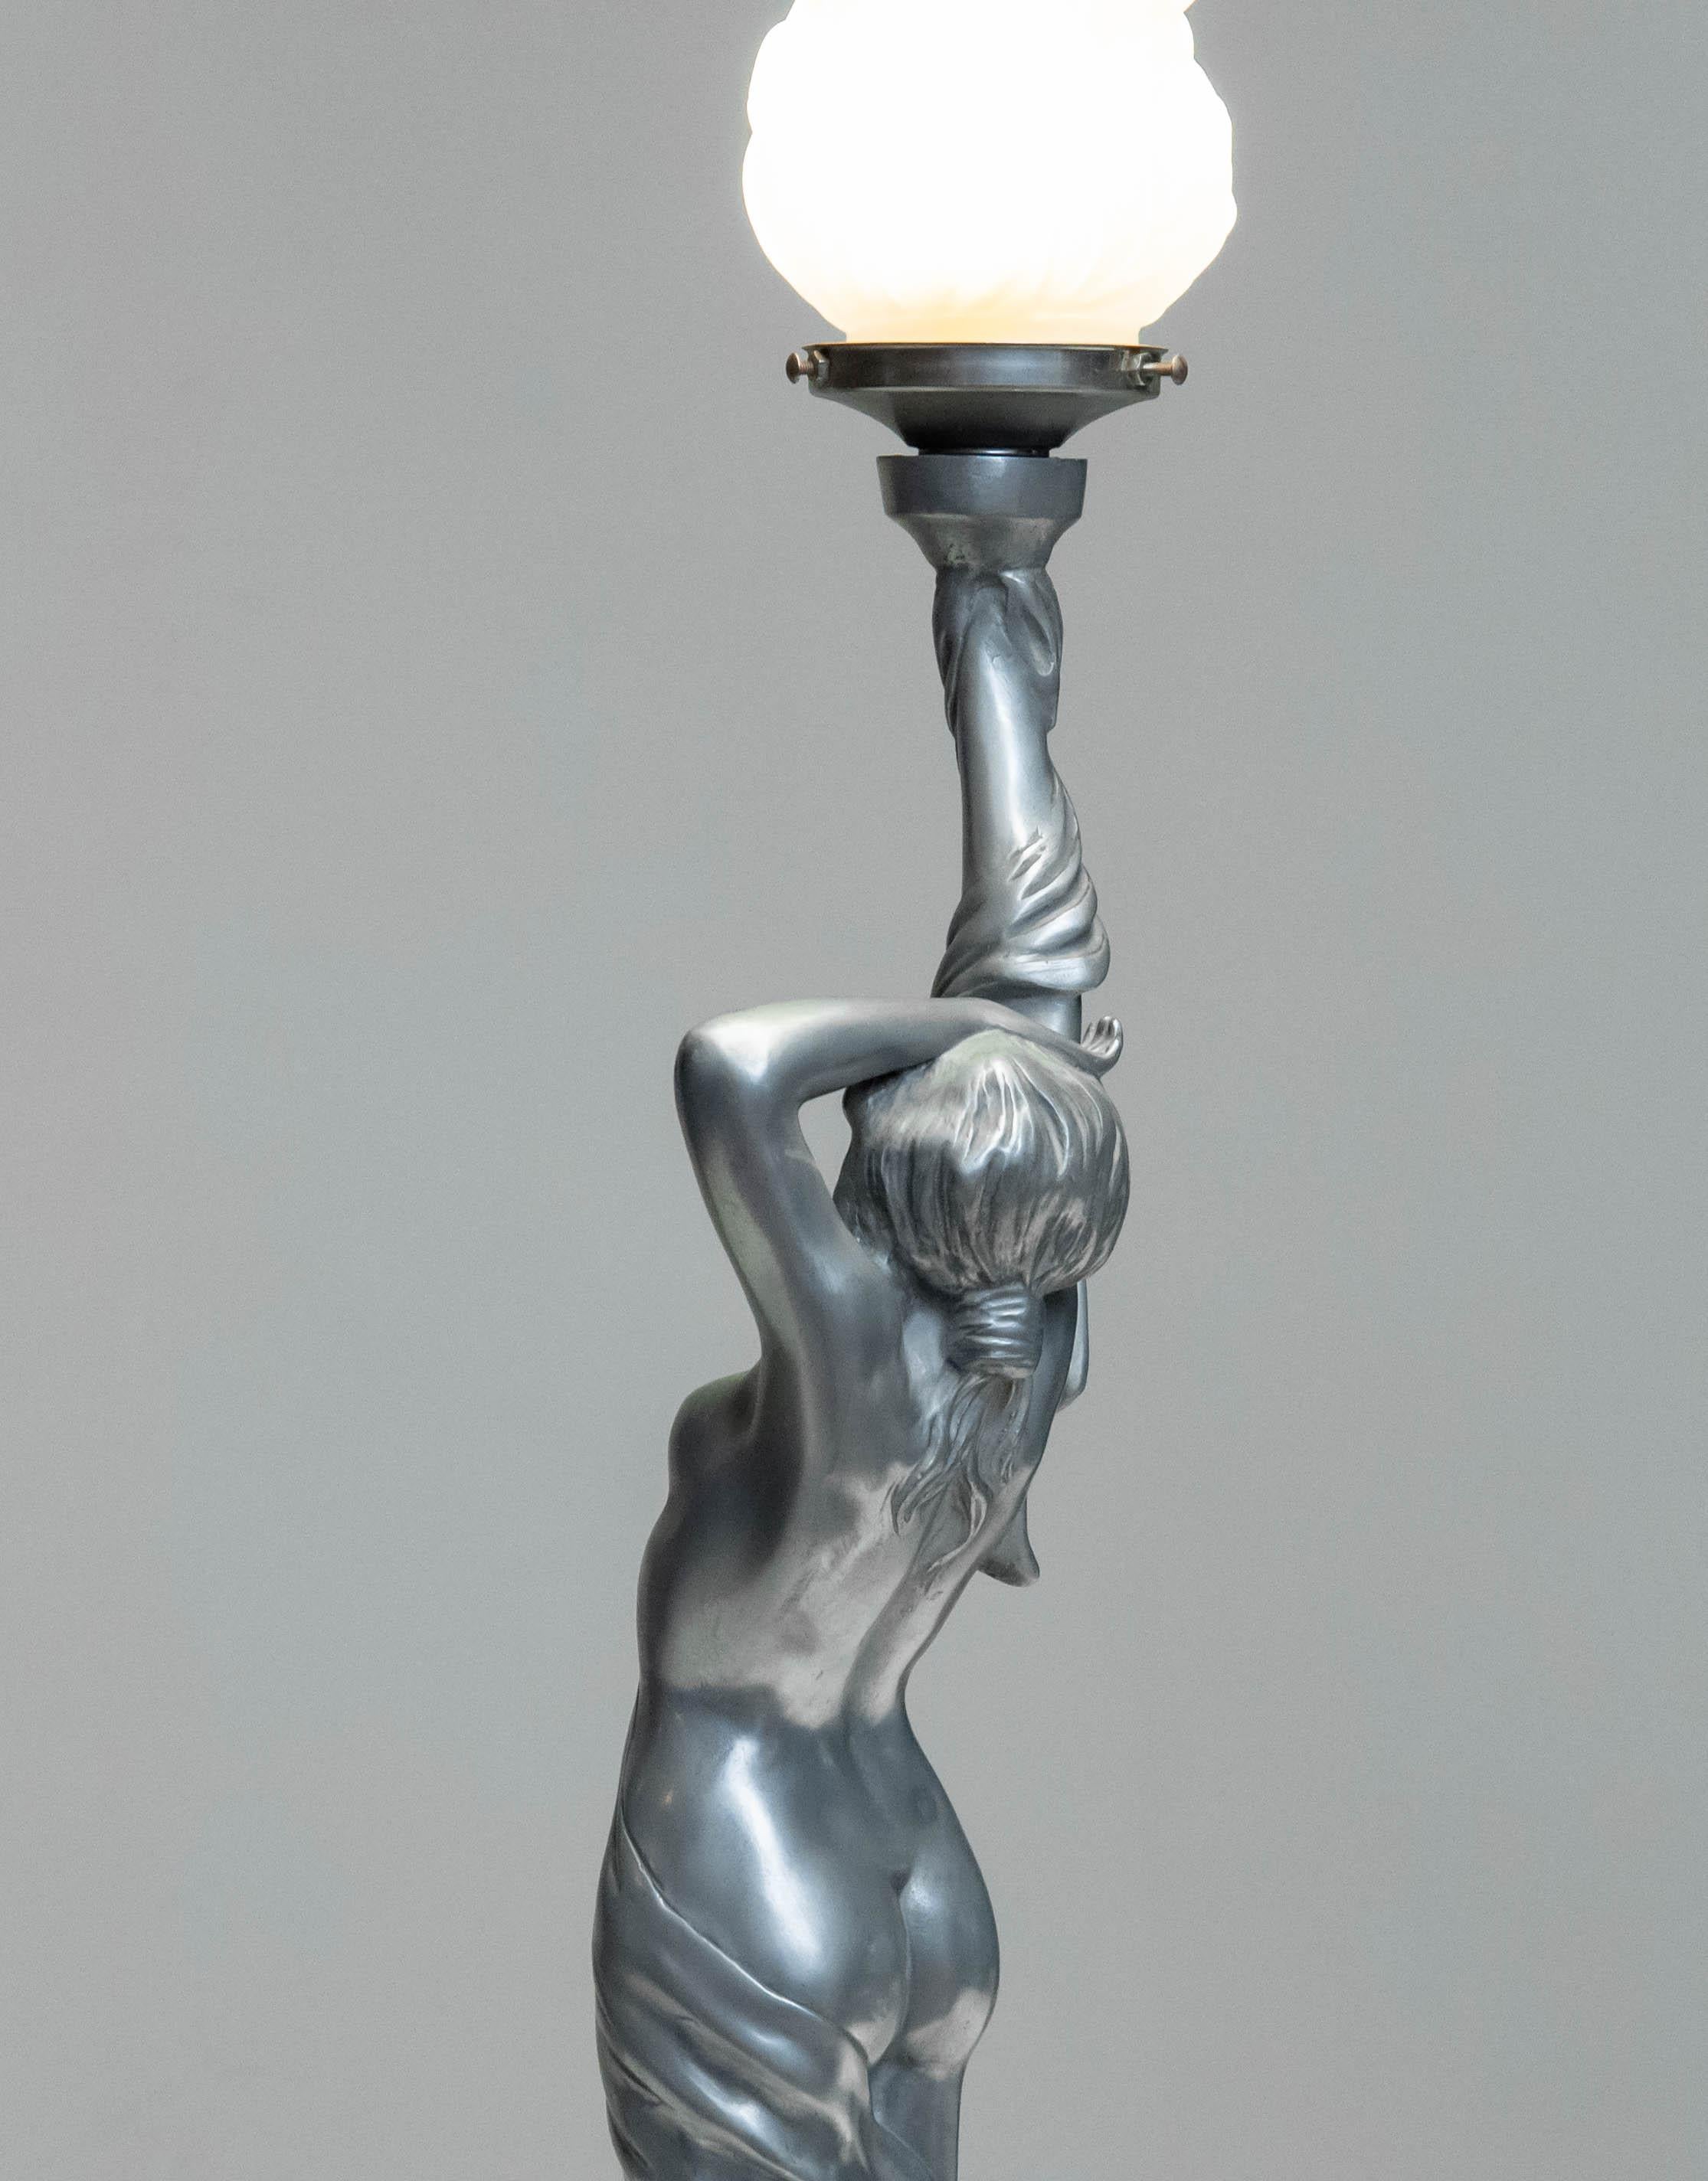 French Art Deco Biba Woman Table Lamp Pewter on Marble Base In Good Condition For Sale In Silvolde, Gelderland